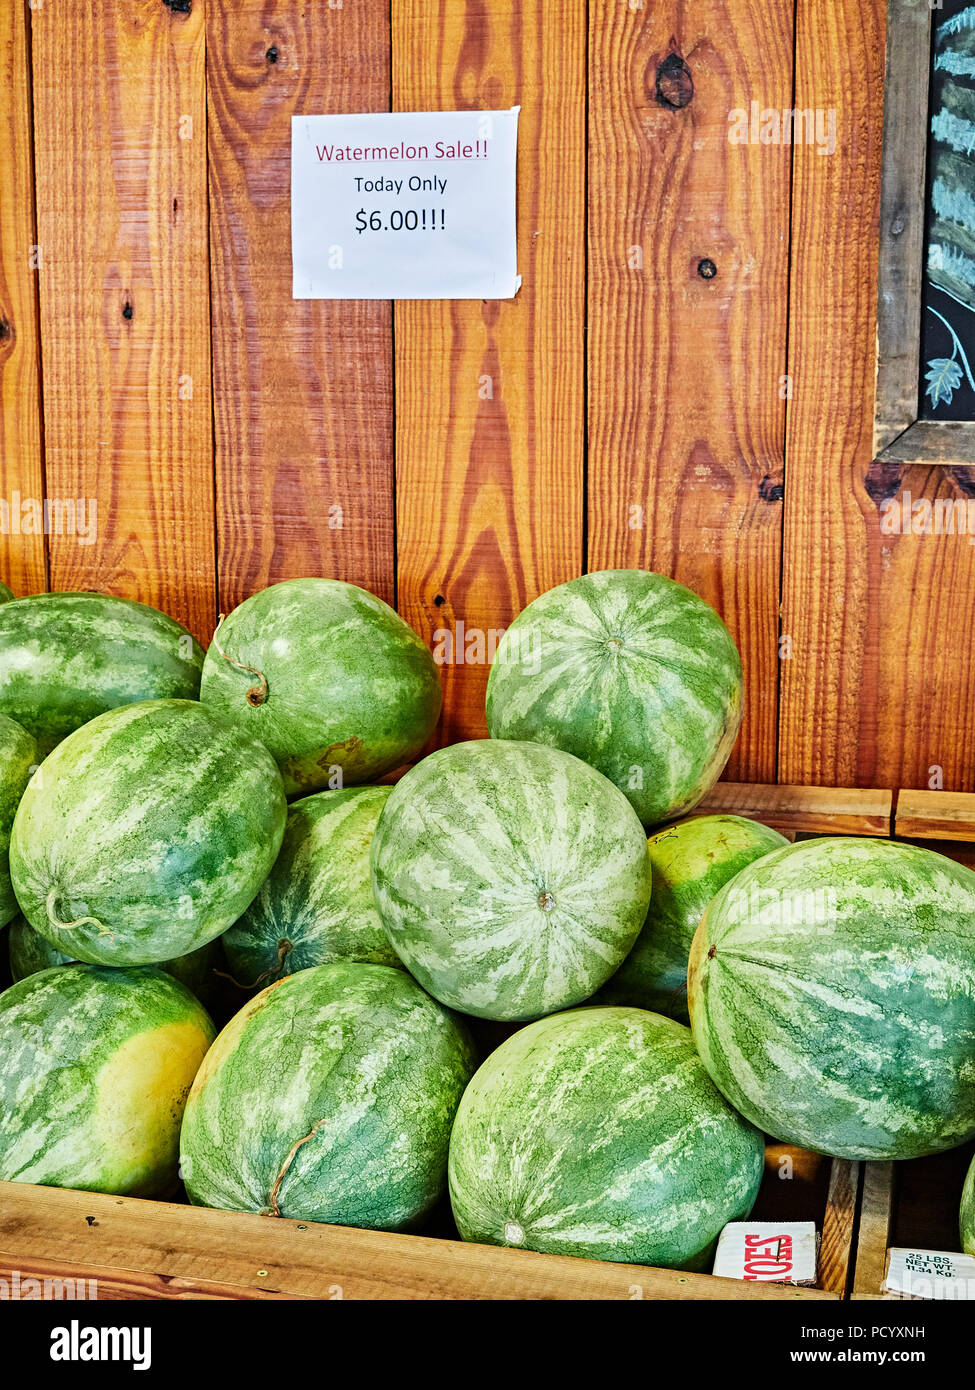 Watermelon fruit stacked on display for sale at a roadside farm or farmer's market in rural Alabama, USA. Stock Photo